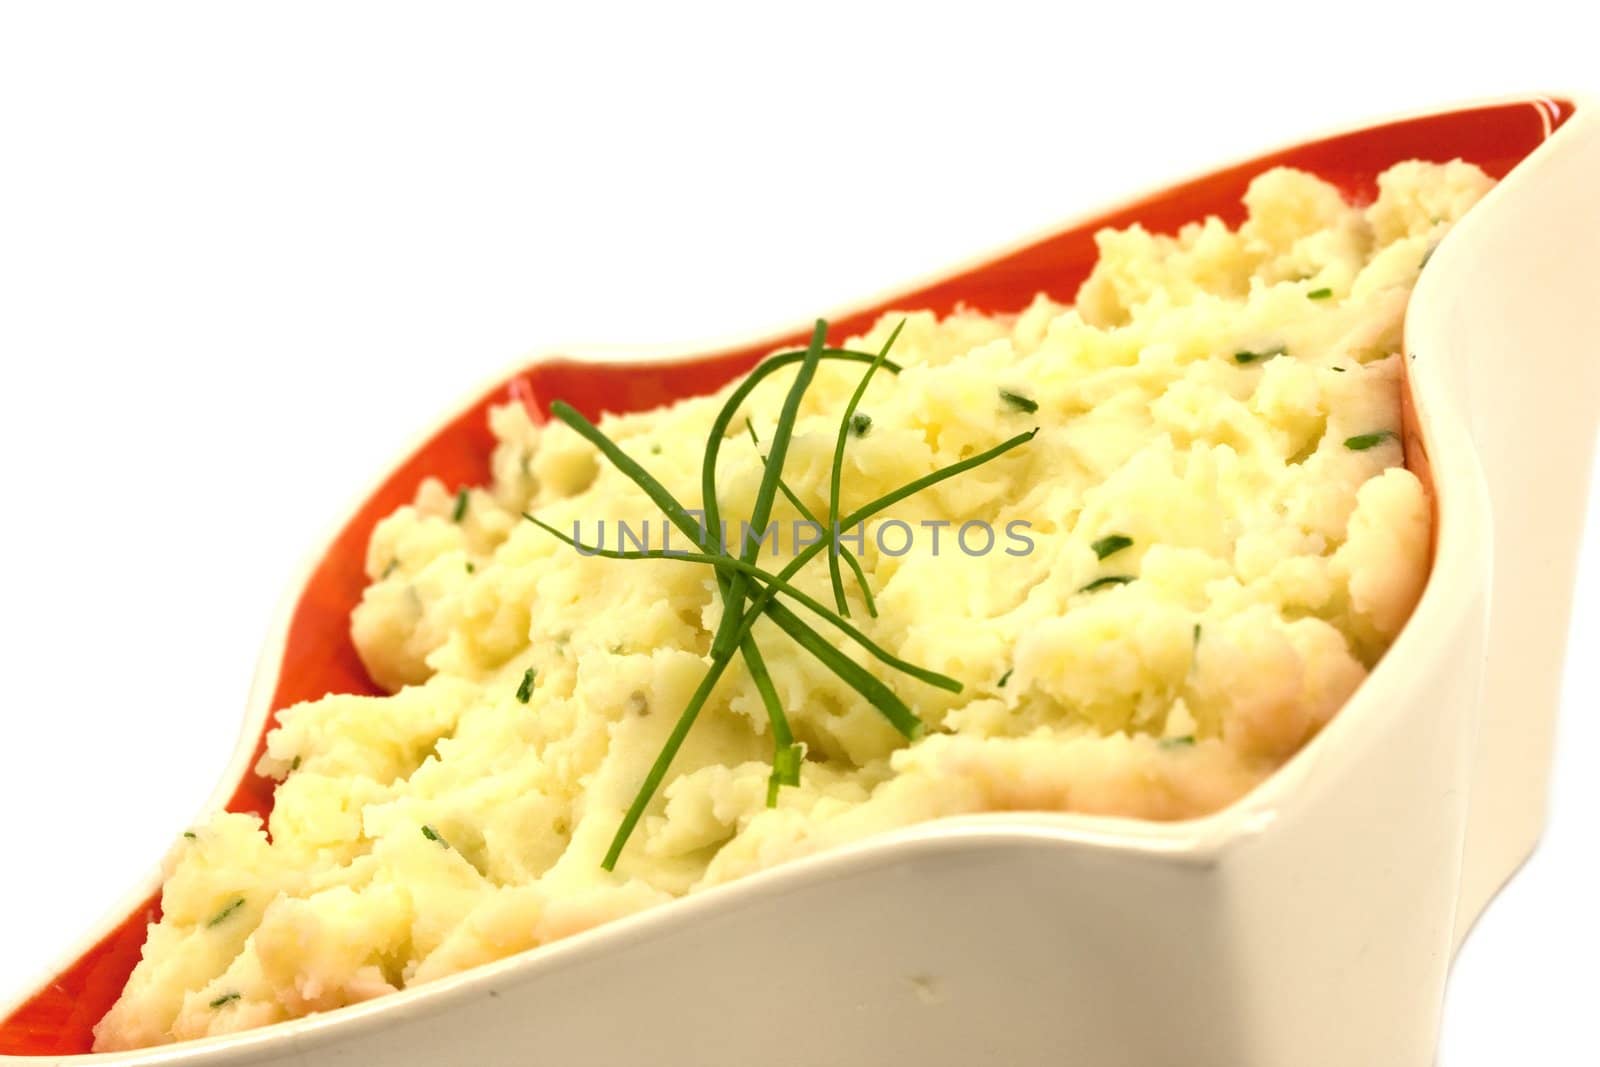 Mashed potatoes with chives in a retro orange bowl